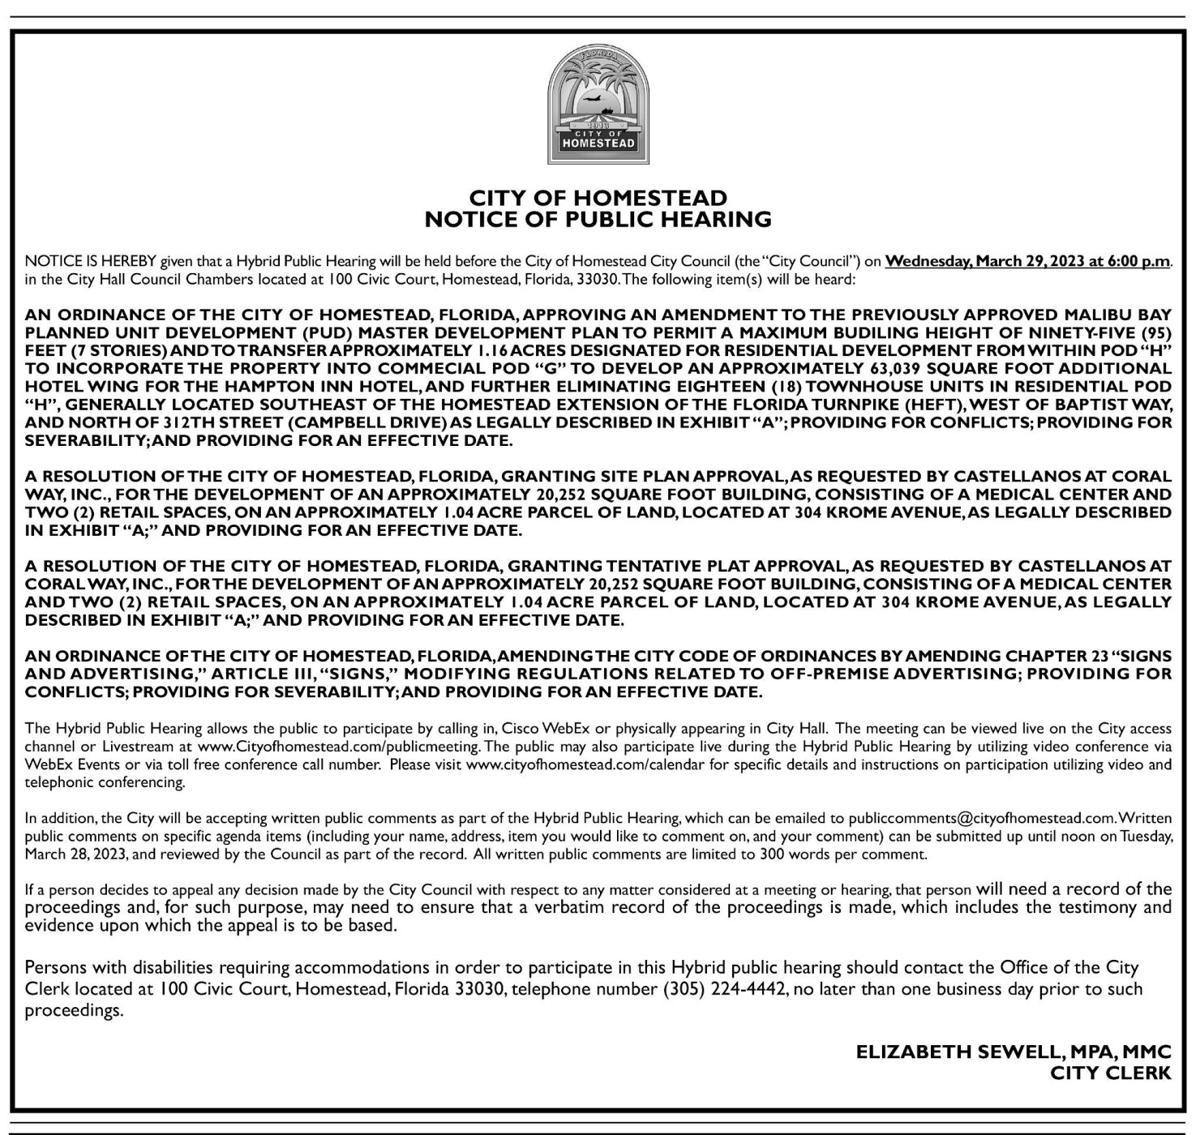 City of Homestead - Notice of Public Hearing